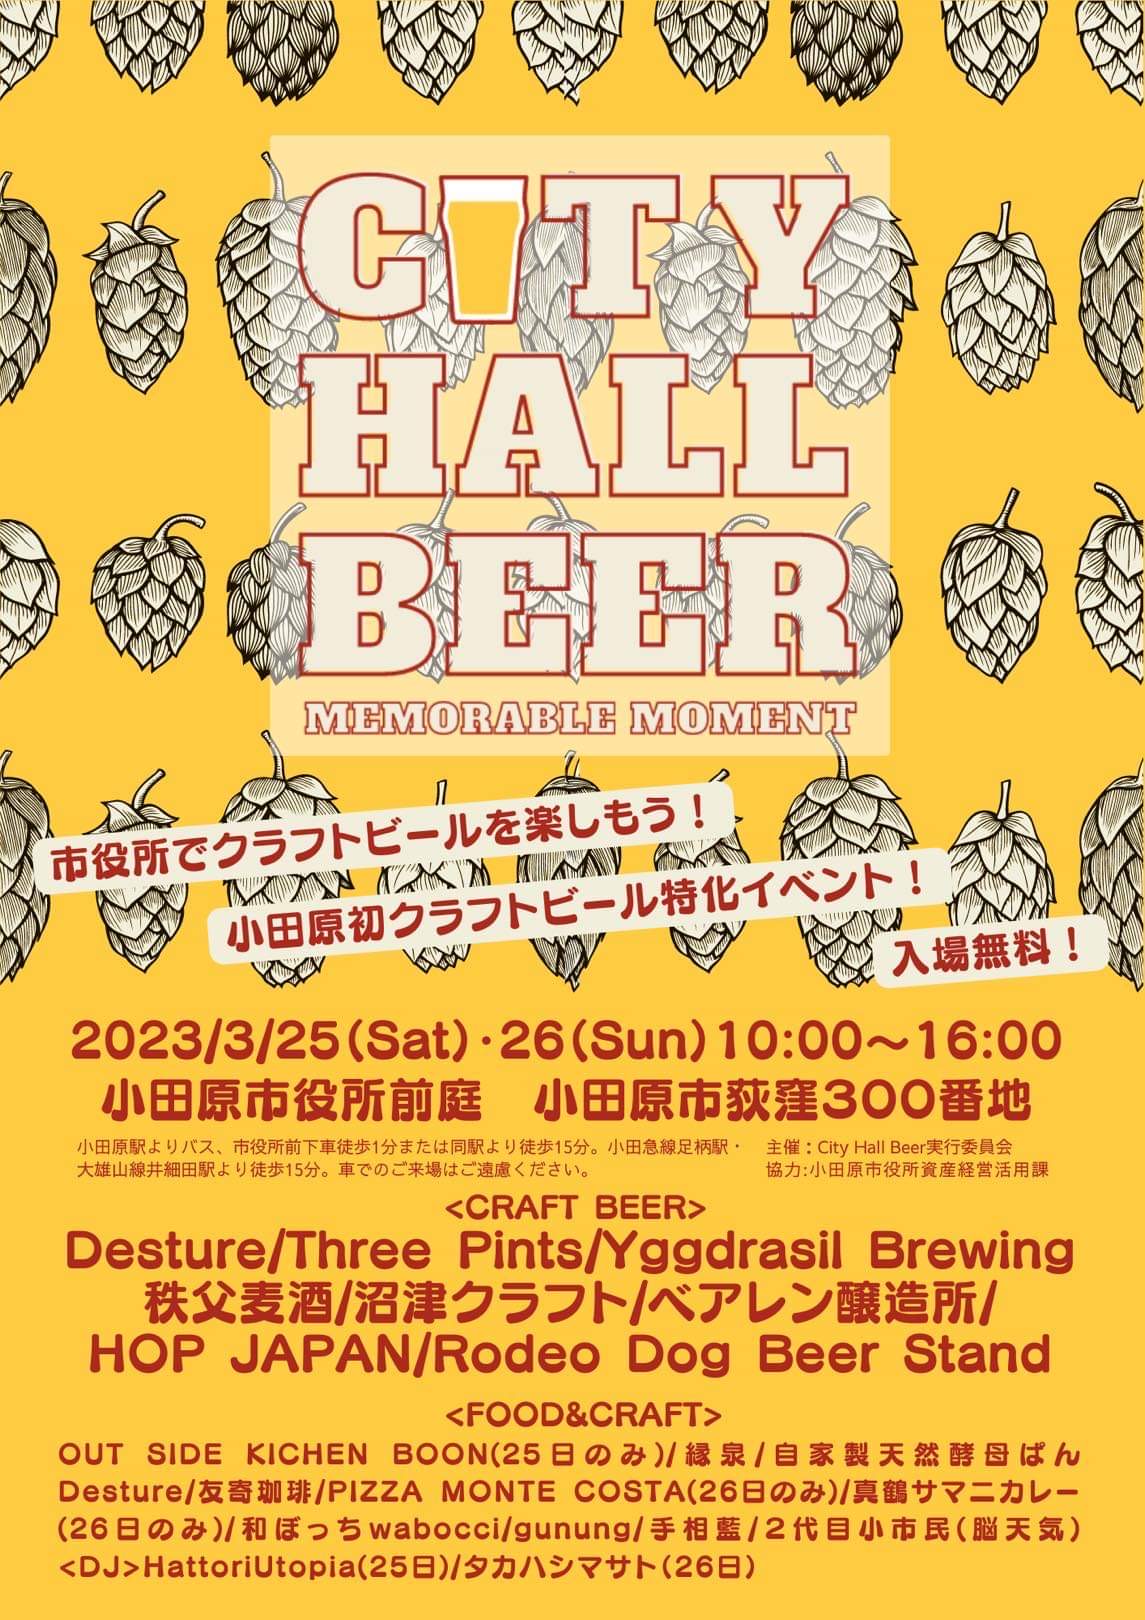 City Hall Beer Event開催❣️